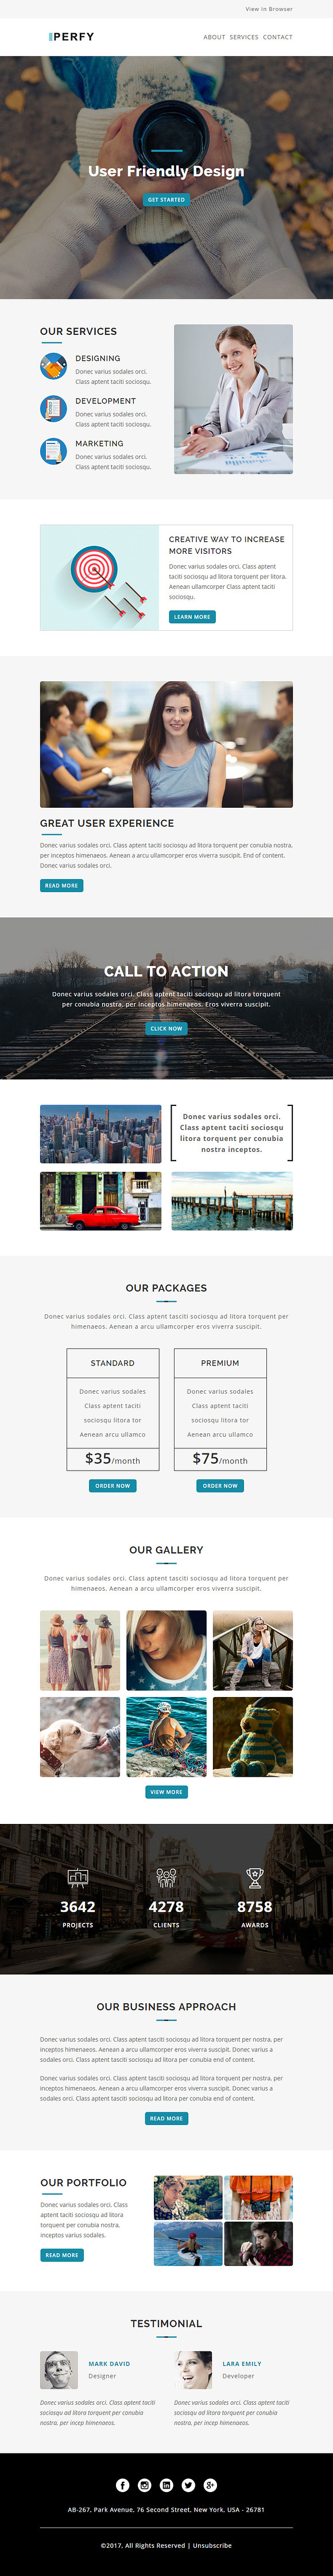 Perfy - Responsive Email Template in Mailchimp Templates - product preview 1